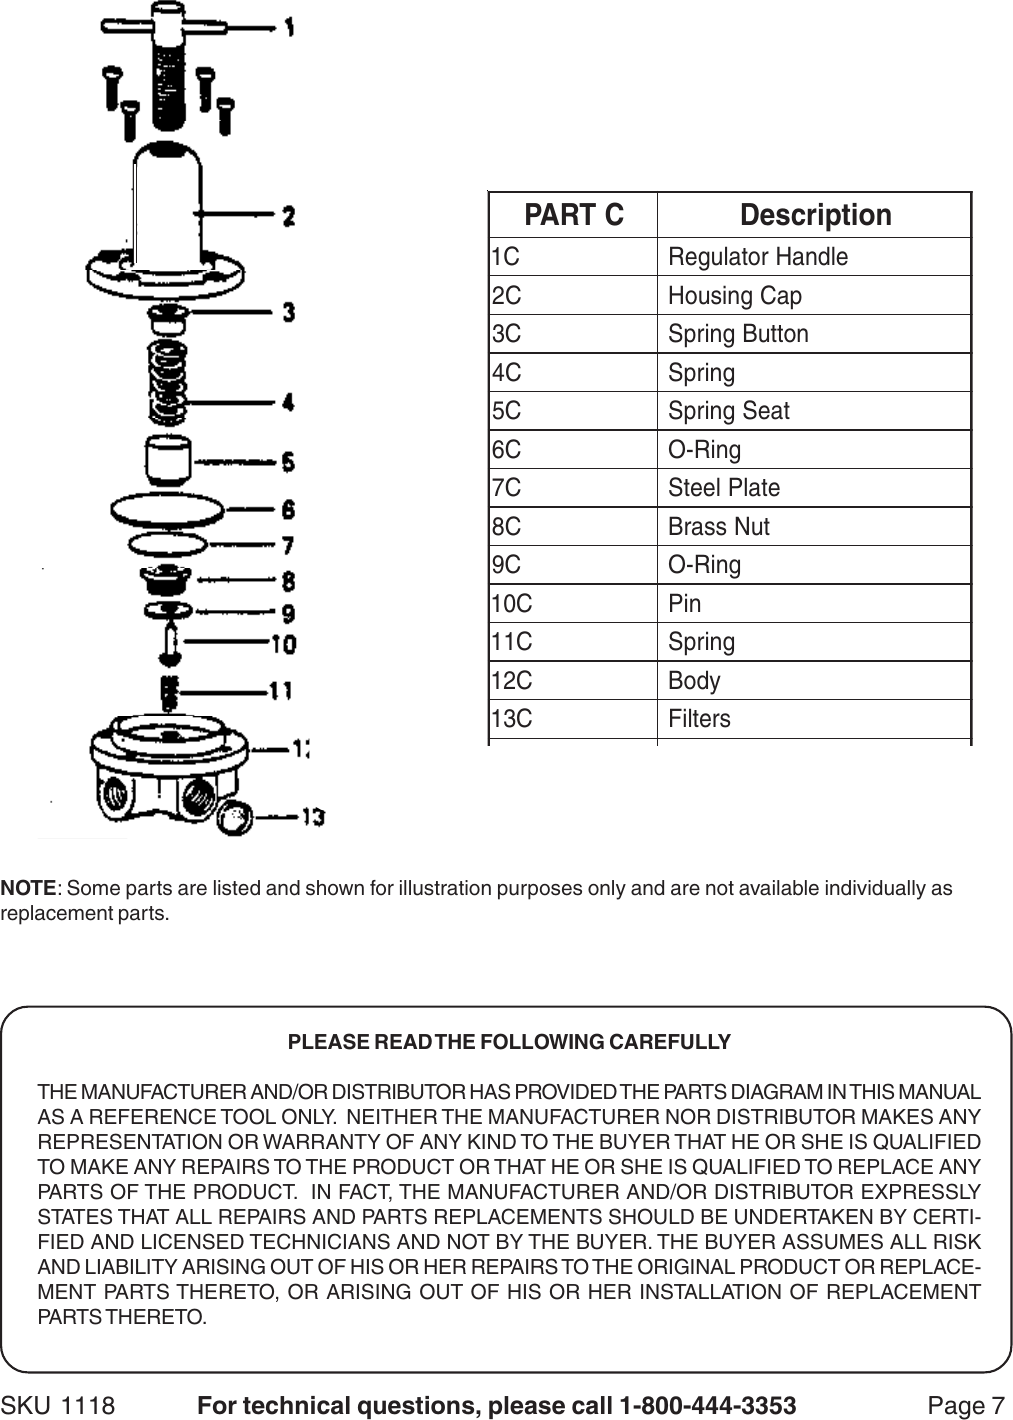 Page 7 of 8 - Harbor-Freight Harbor-Freight-1118-Users-Manual- 45009-92261 Manual  Harbor-freight-1118-users-manual